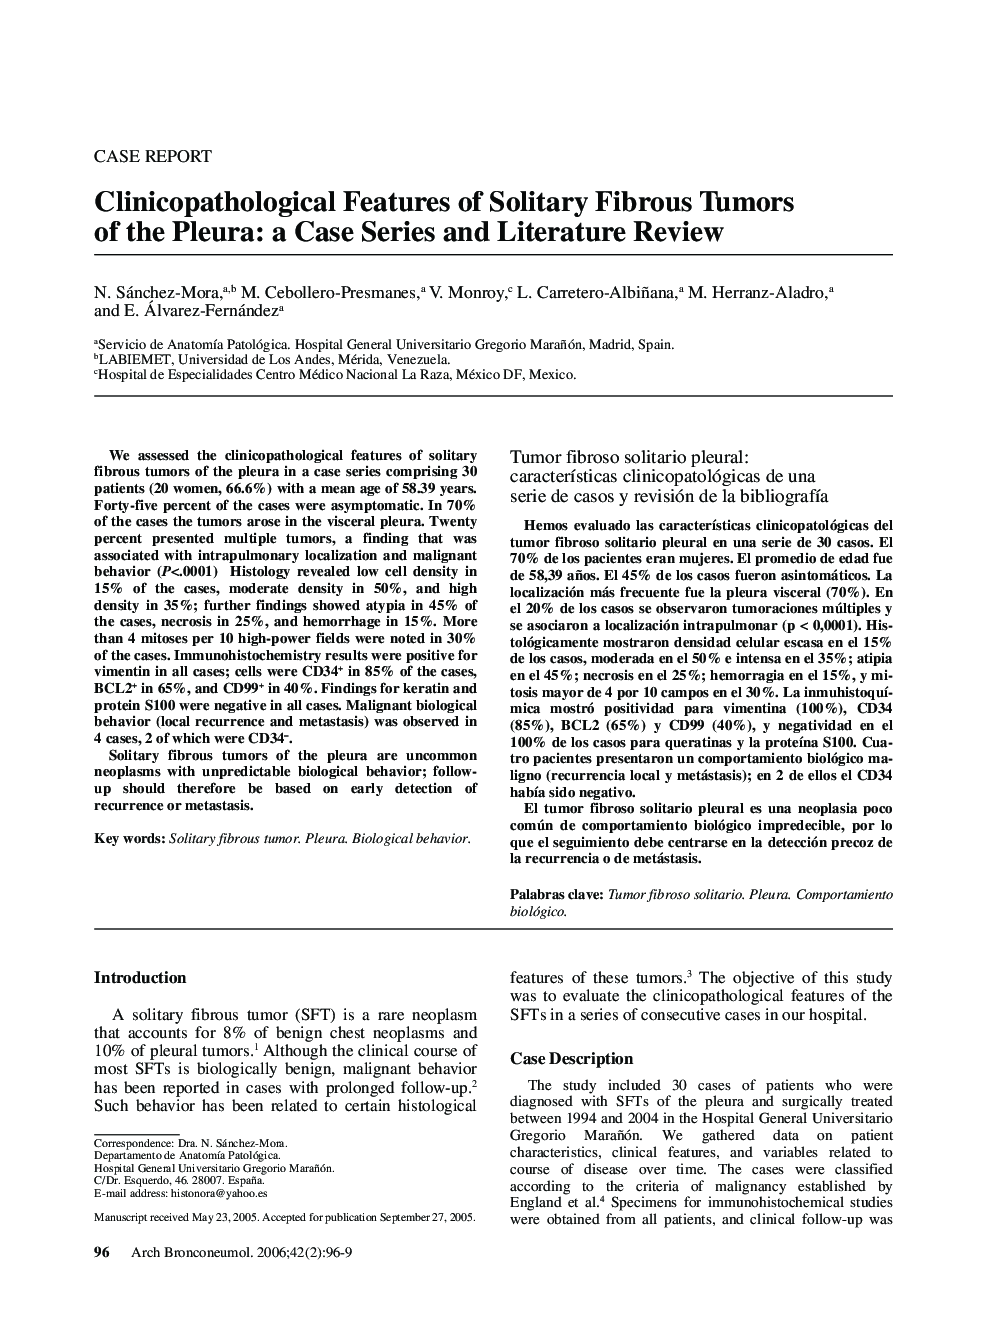 Clinicopathological Features of Solitary Fibrous Tumors of the Pleura: a Case Series and Literature Review